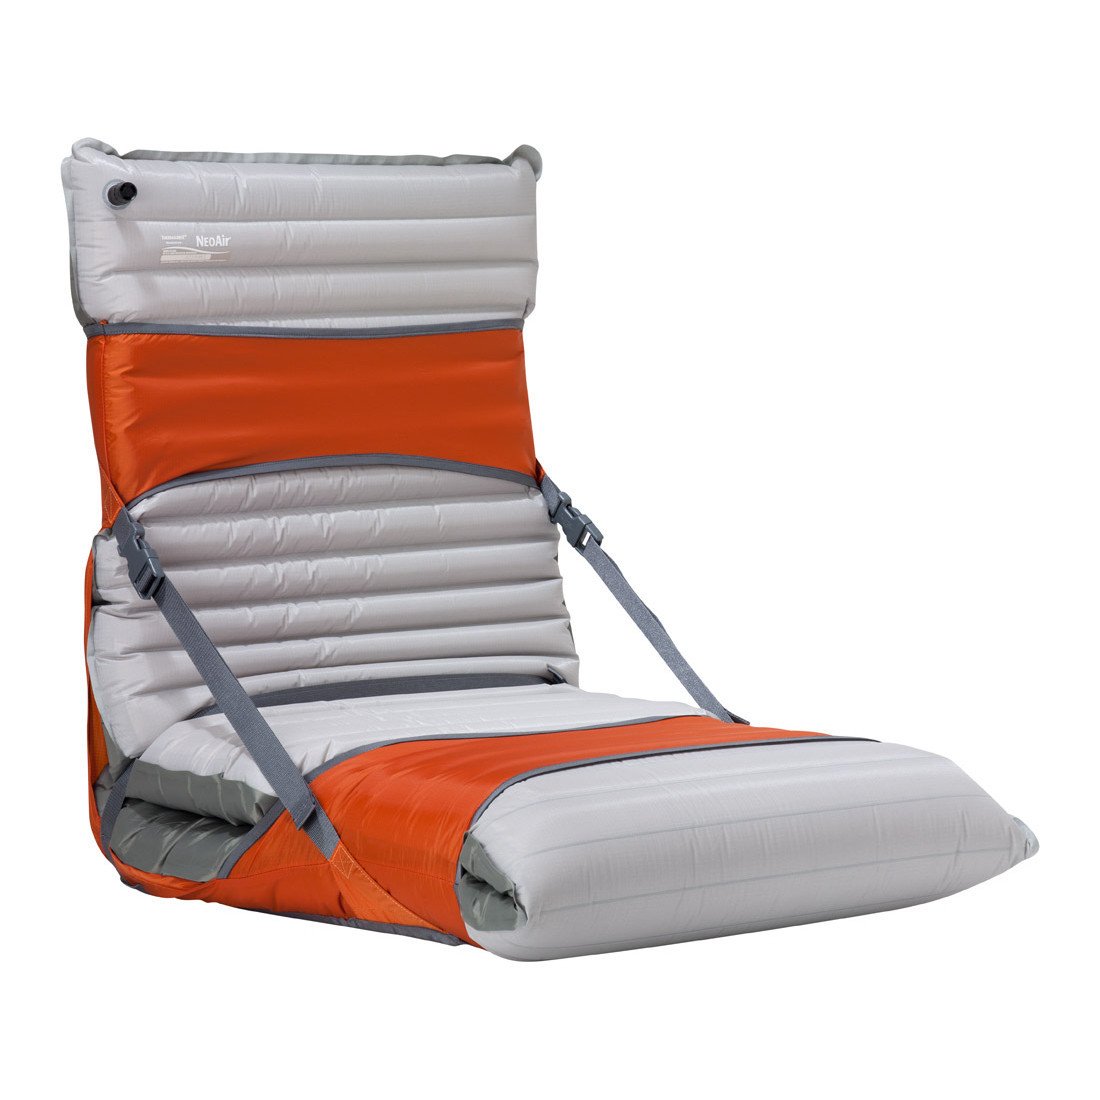 Thermarest Trekker Chair Kit 20, shown with grey mat, in orange colour